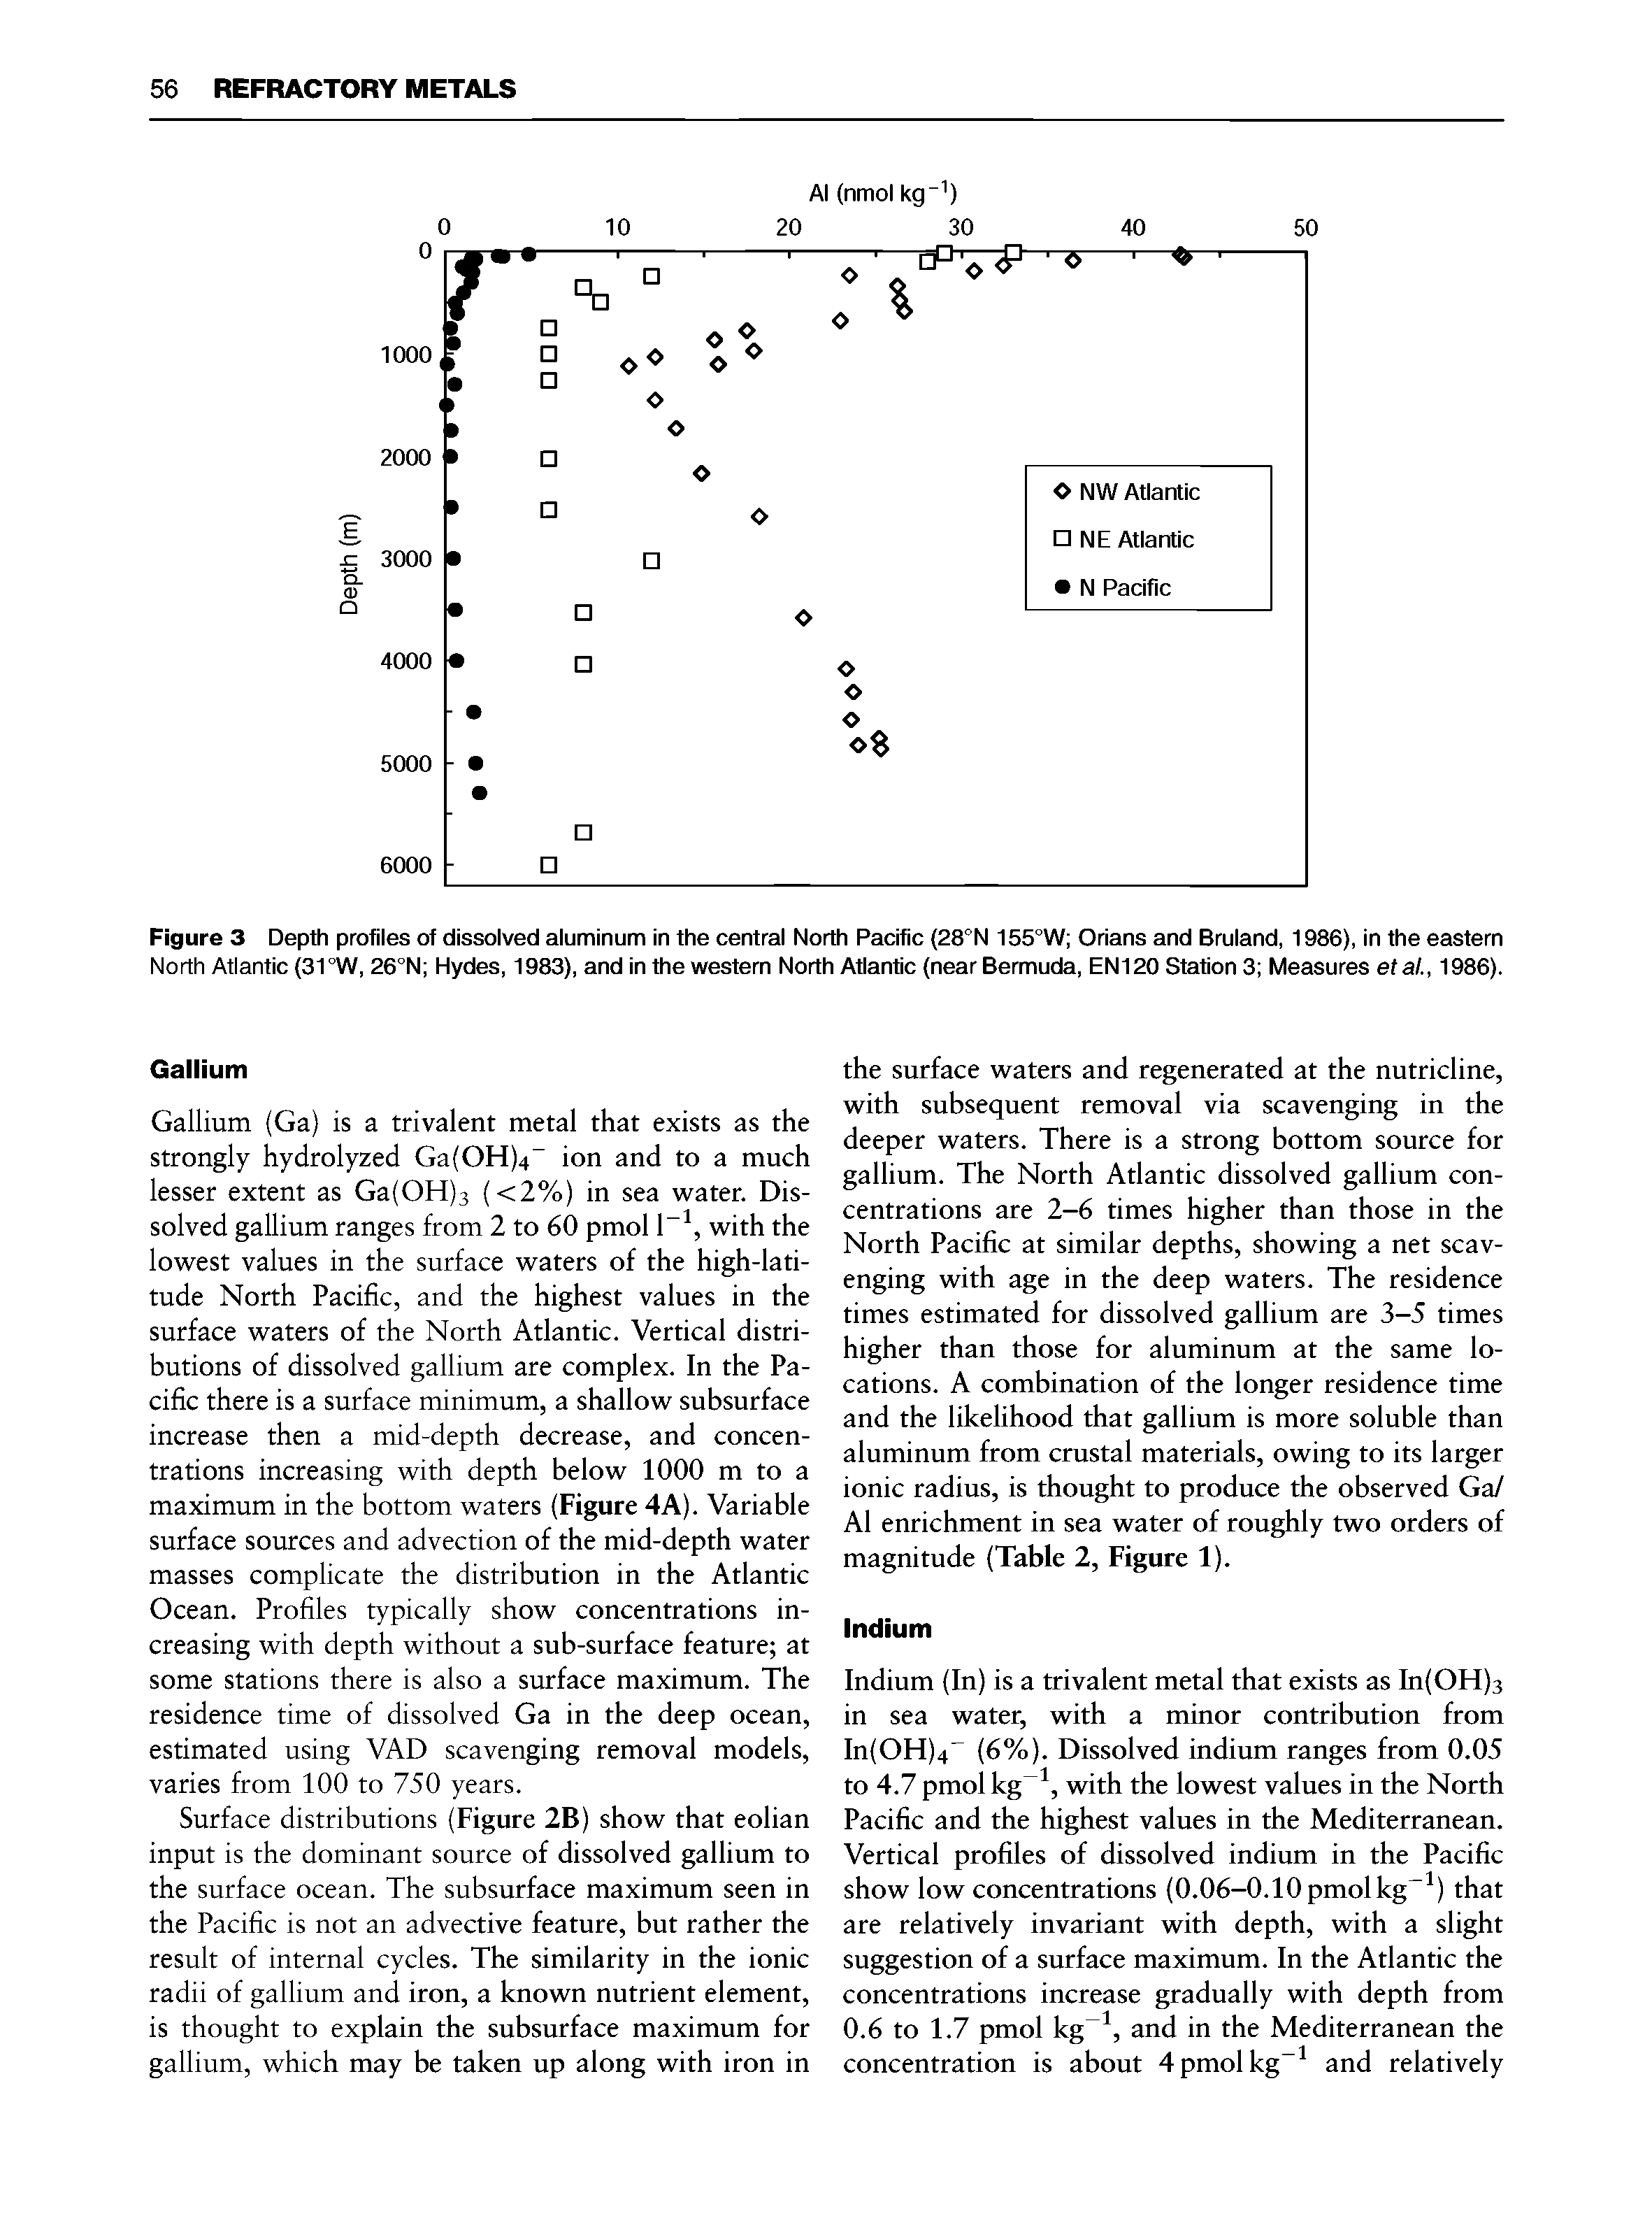 Figure 3 Depth profiles of dissolved aluminum in the central North Pacific (28°N 155°W Orians and Bruland, 1986), in the eastern North Atlantic (31°W, 26°N Hydes, 1983), and in the western North Atlantic (near Bermuda, EN120 Station 3 Measures etal., 1986).